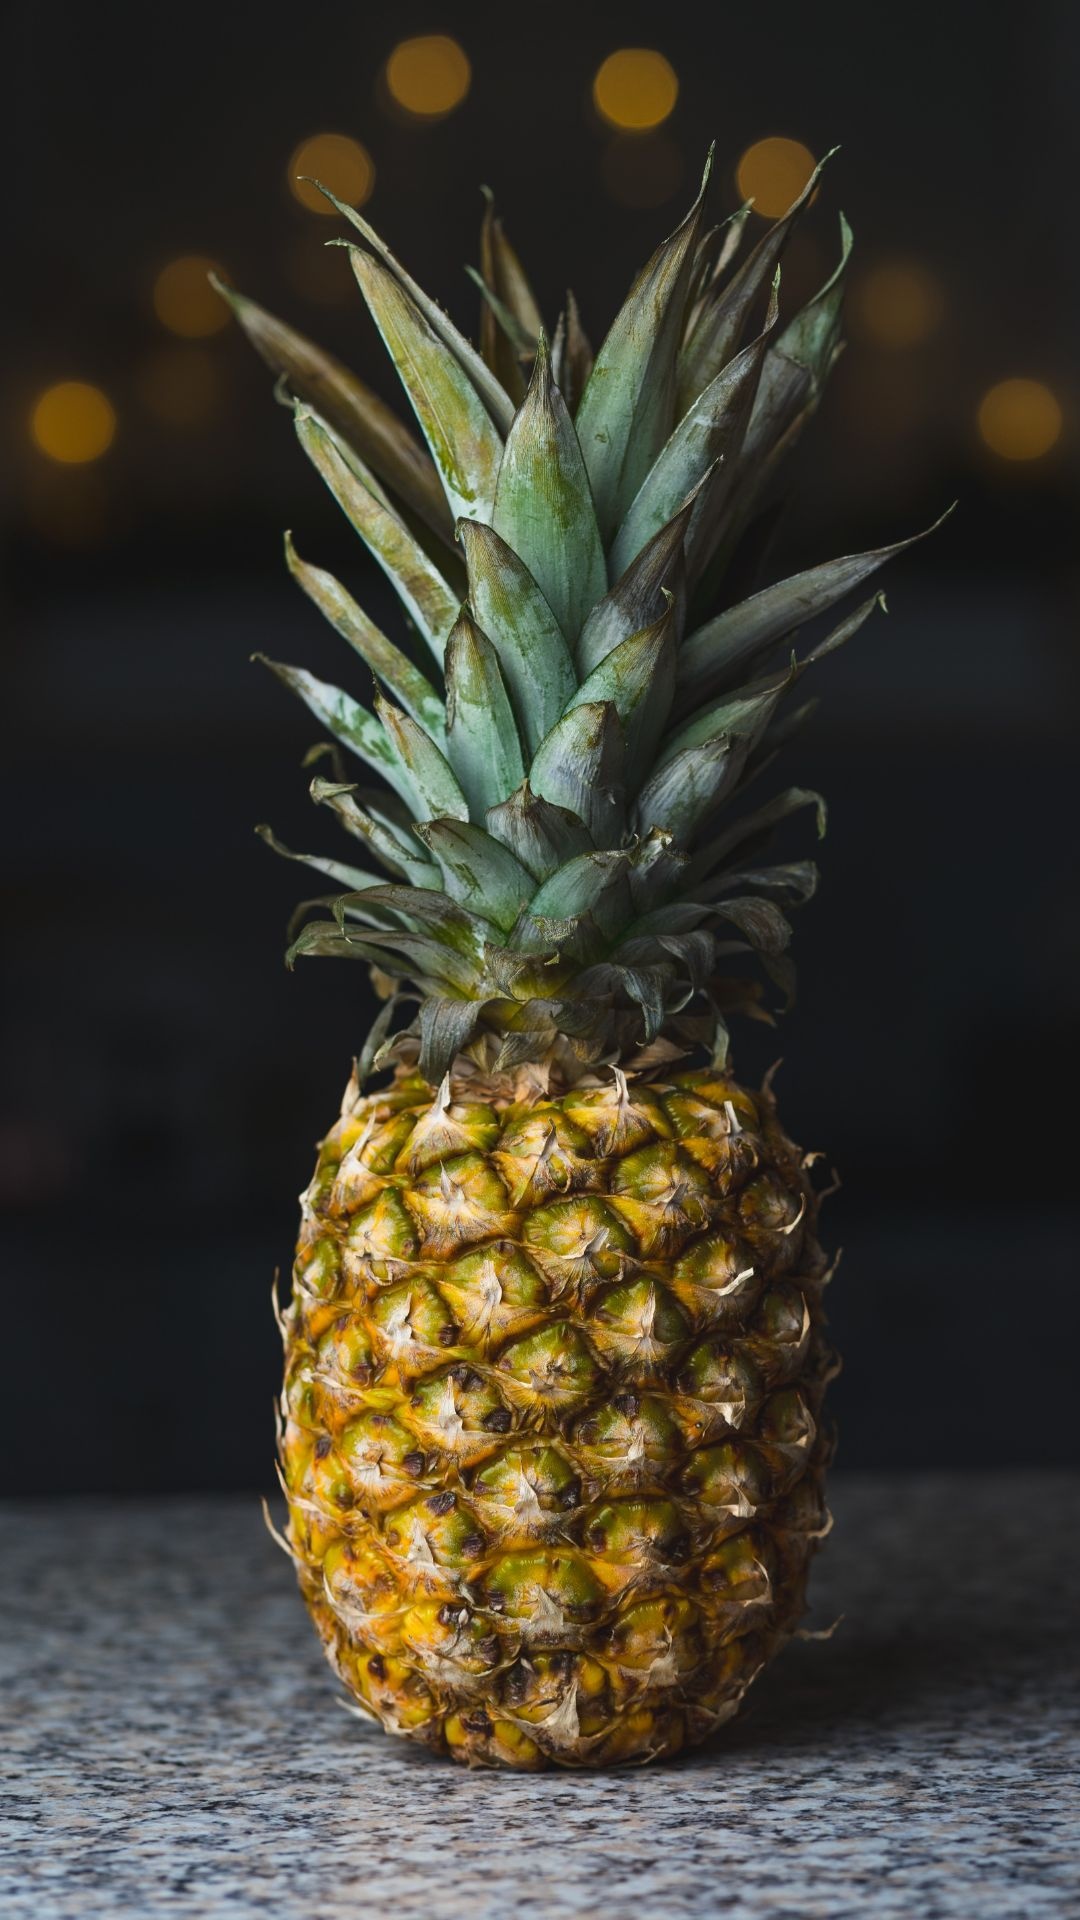 Pineapple: A large tropical fruit with a spiky, tough skin and sweet insides. 1080x1920 Full HD Background.